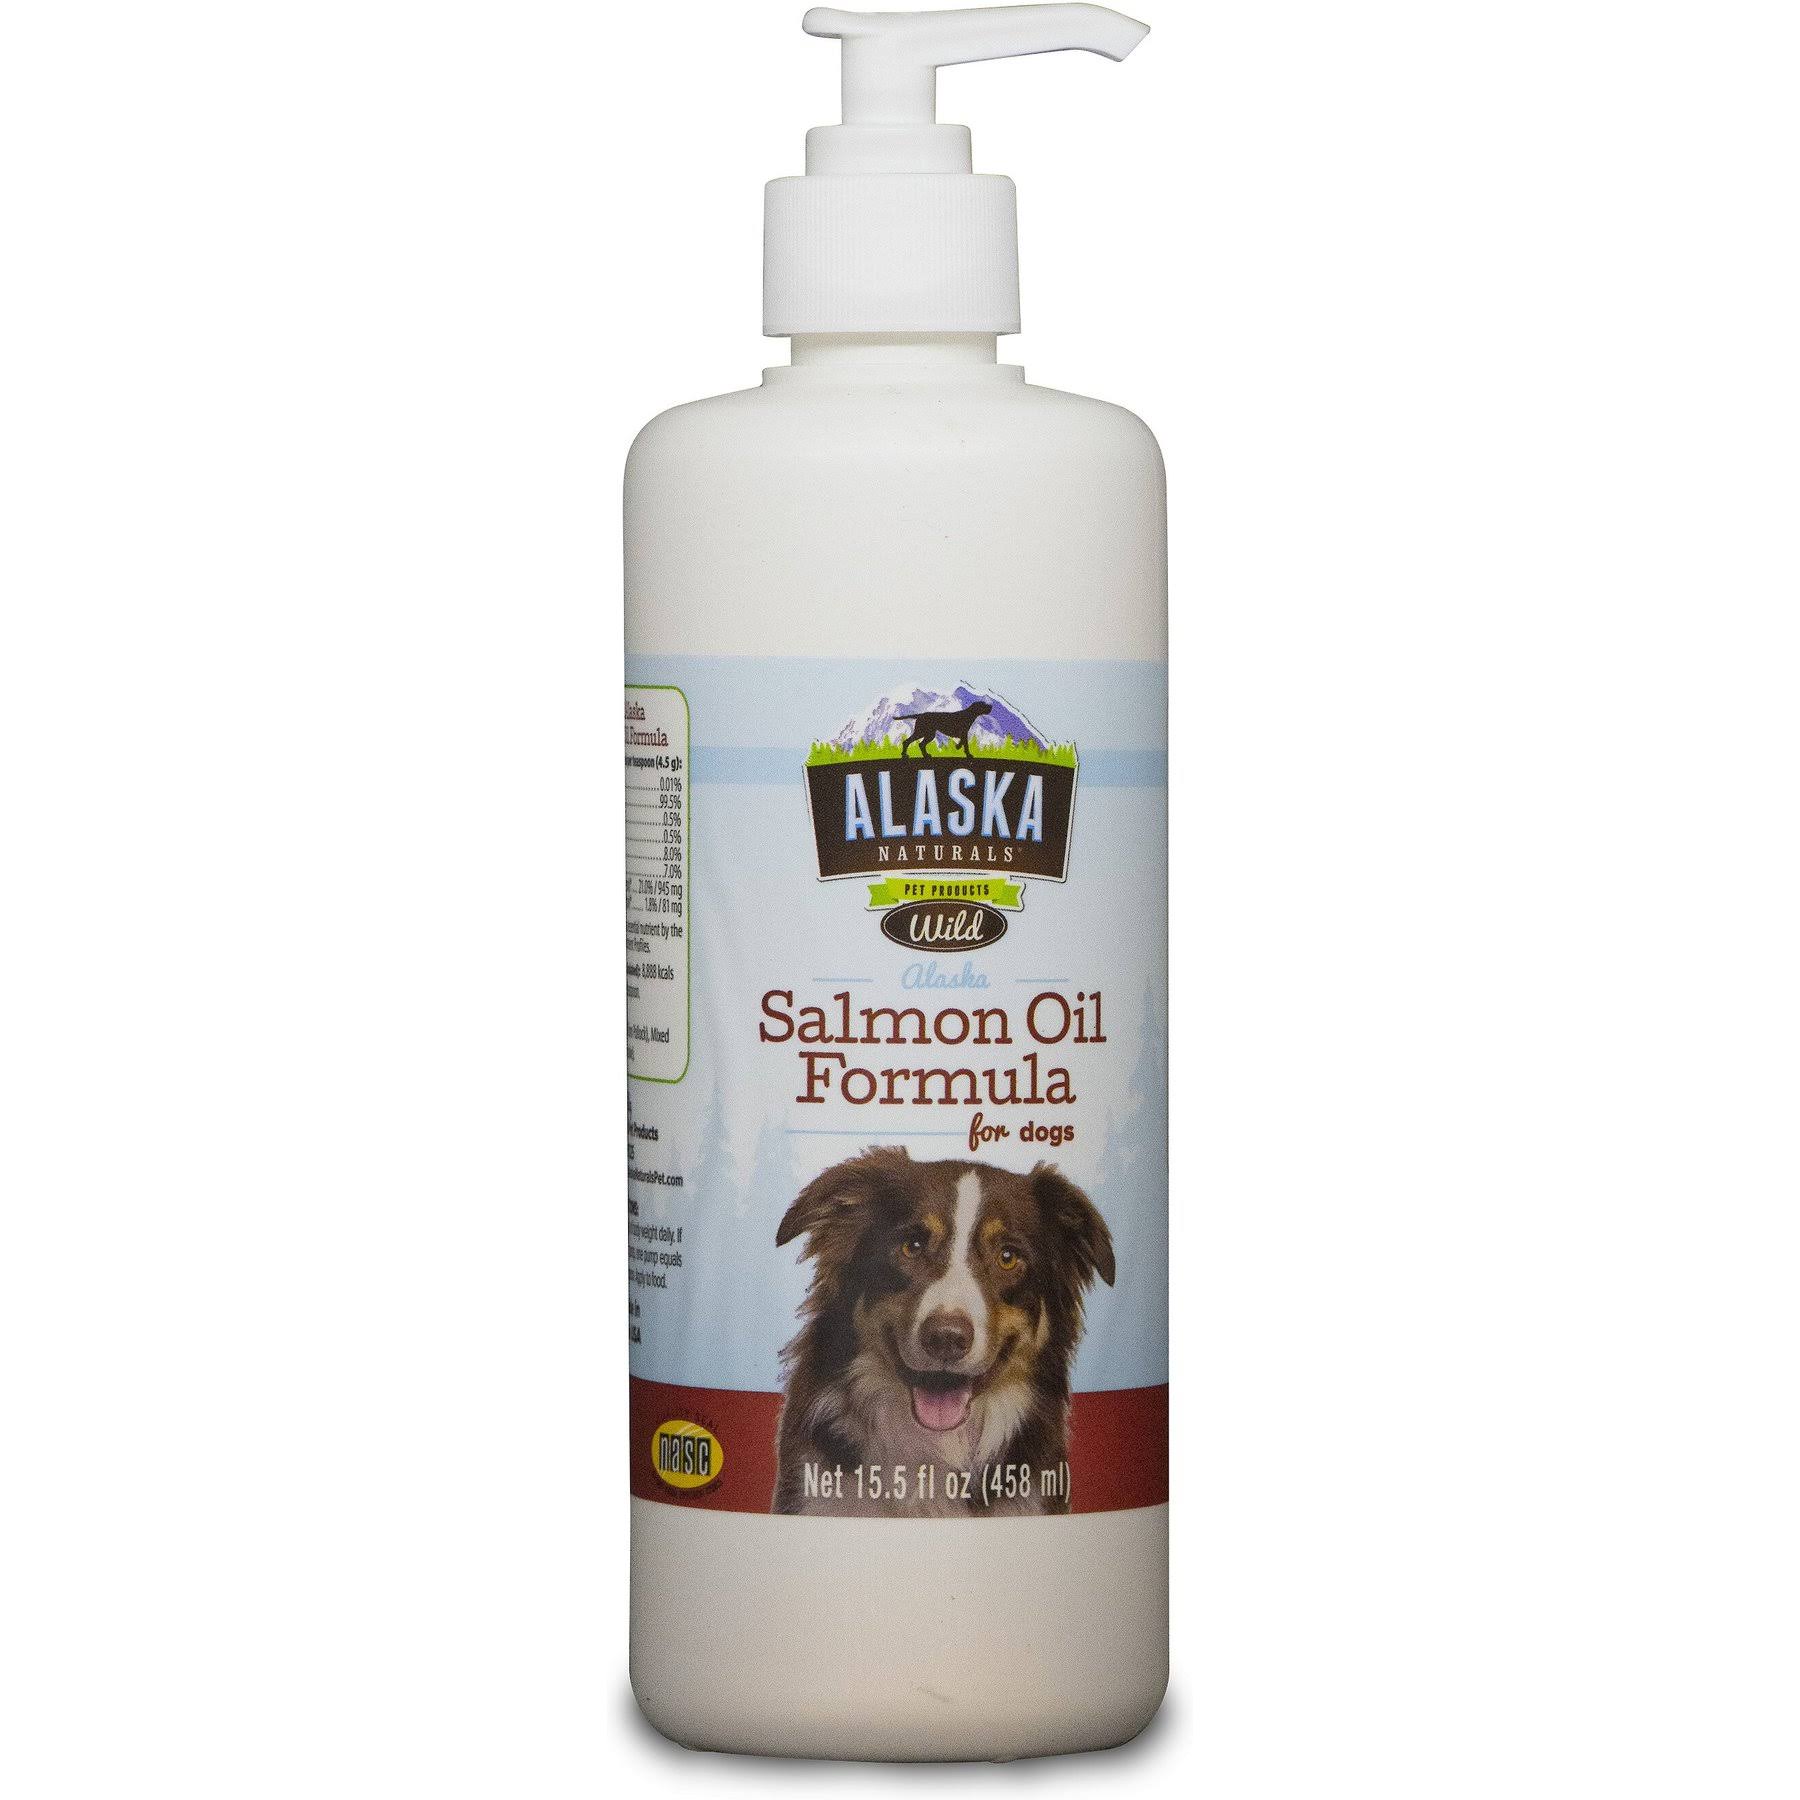 Alaska Naturals 417930 Salmon Oil Skin and Coat Supplement for Dogs, 15.5 oz.